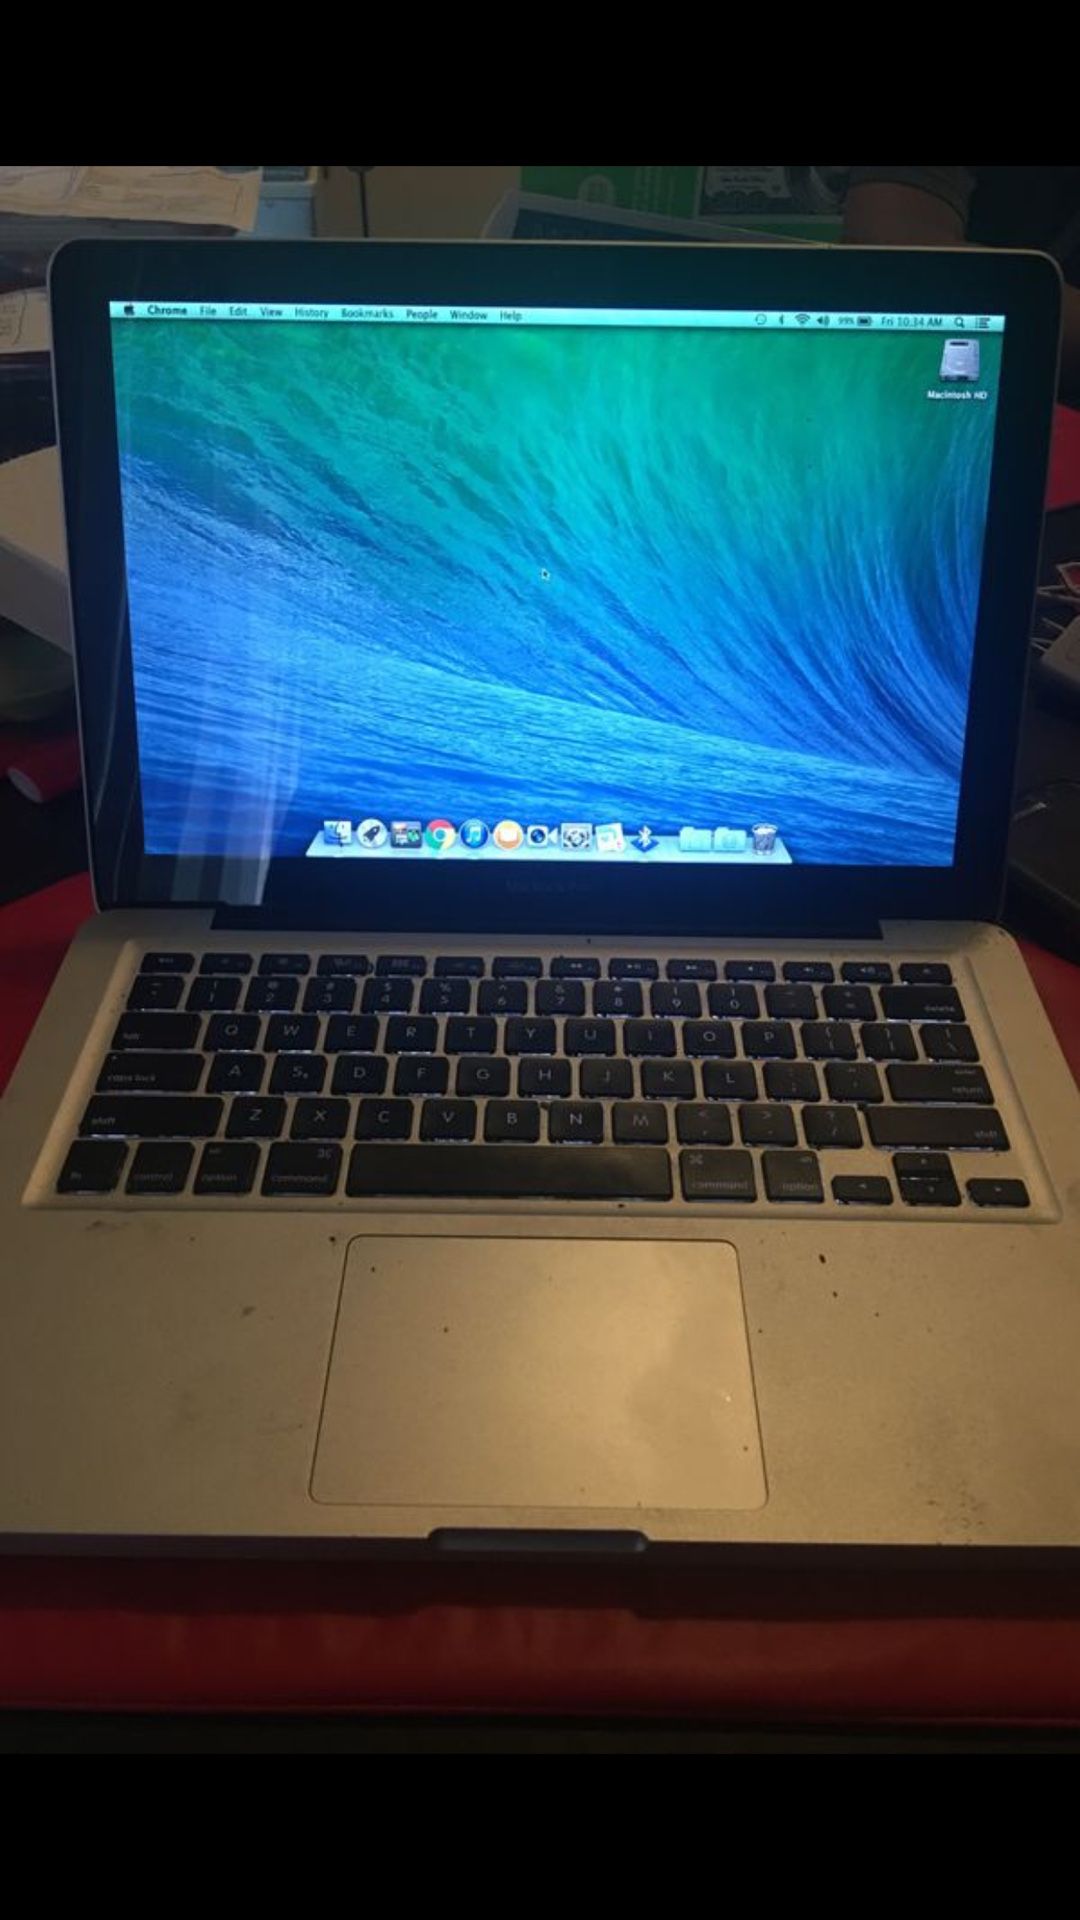 MacBook Pro Late 2011 13inch, i7/6gb/750gb no issues and new battery!